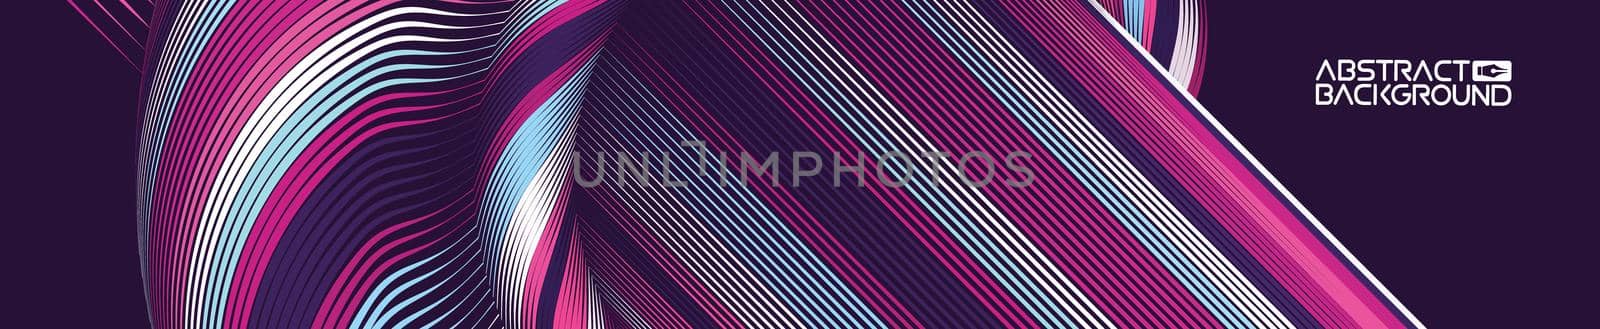 Abstract art backdrop. Colorful curly circle. Futuristic waves wallpaper with folds. Purple background simple. by DmytroRazinkov